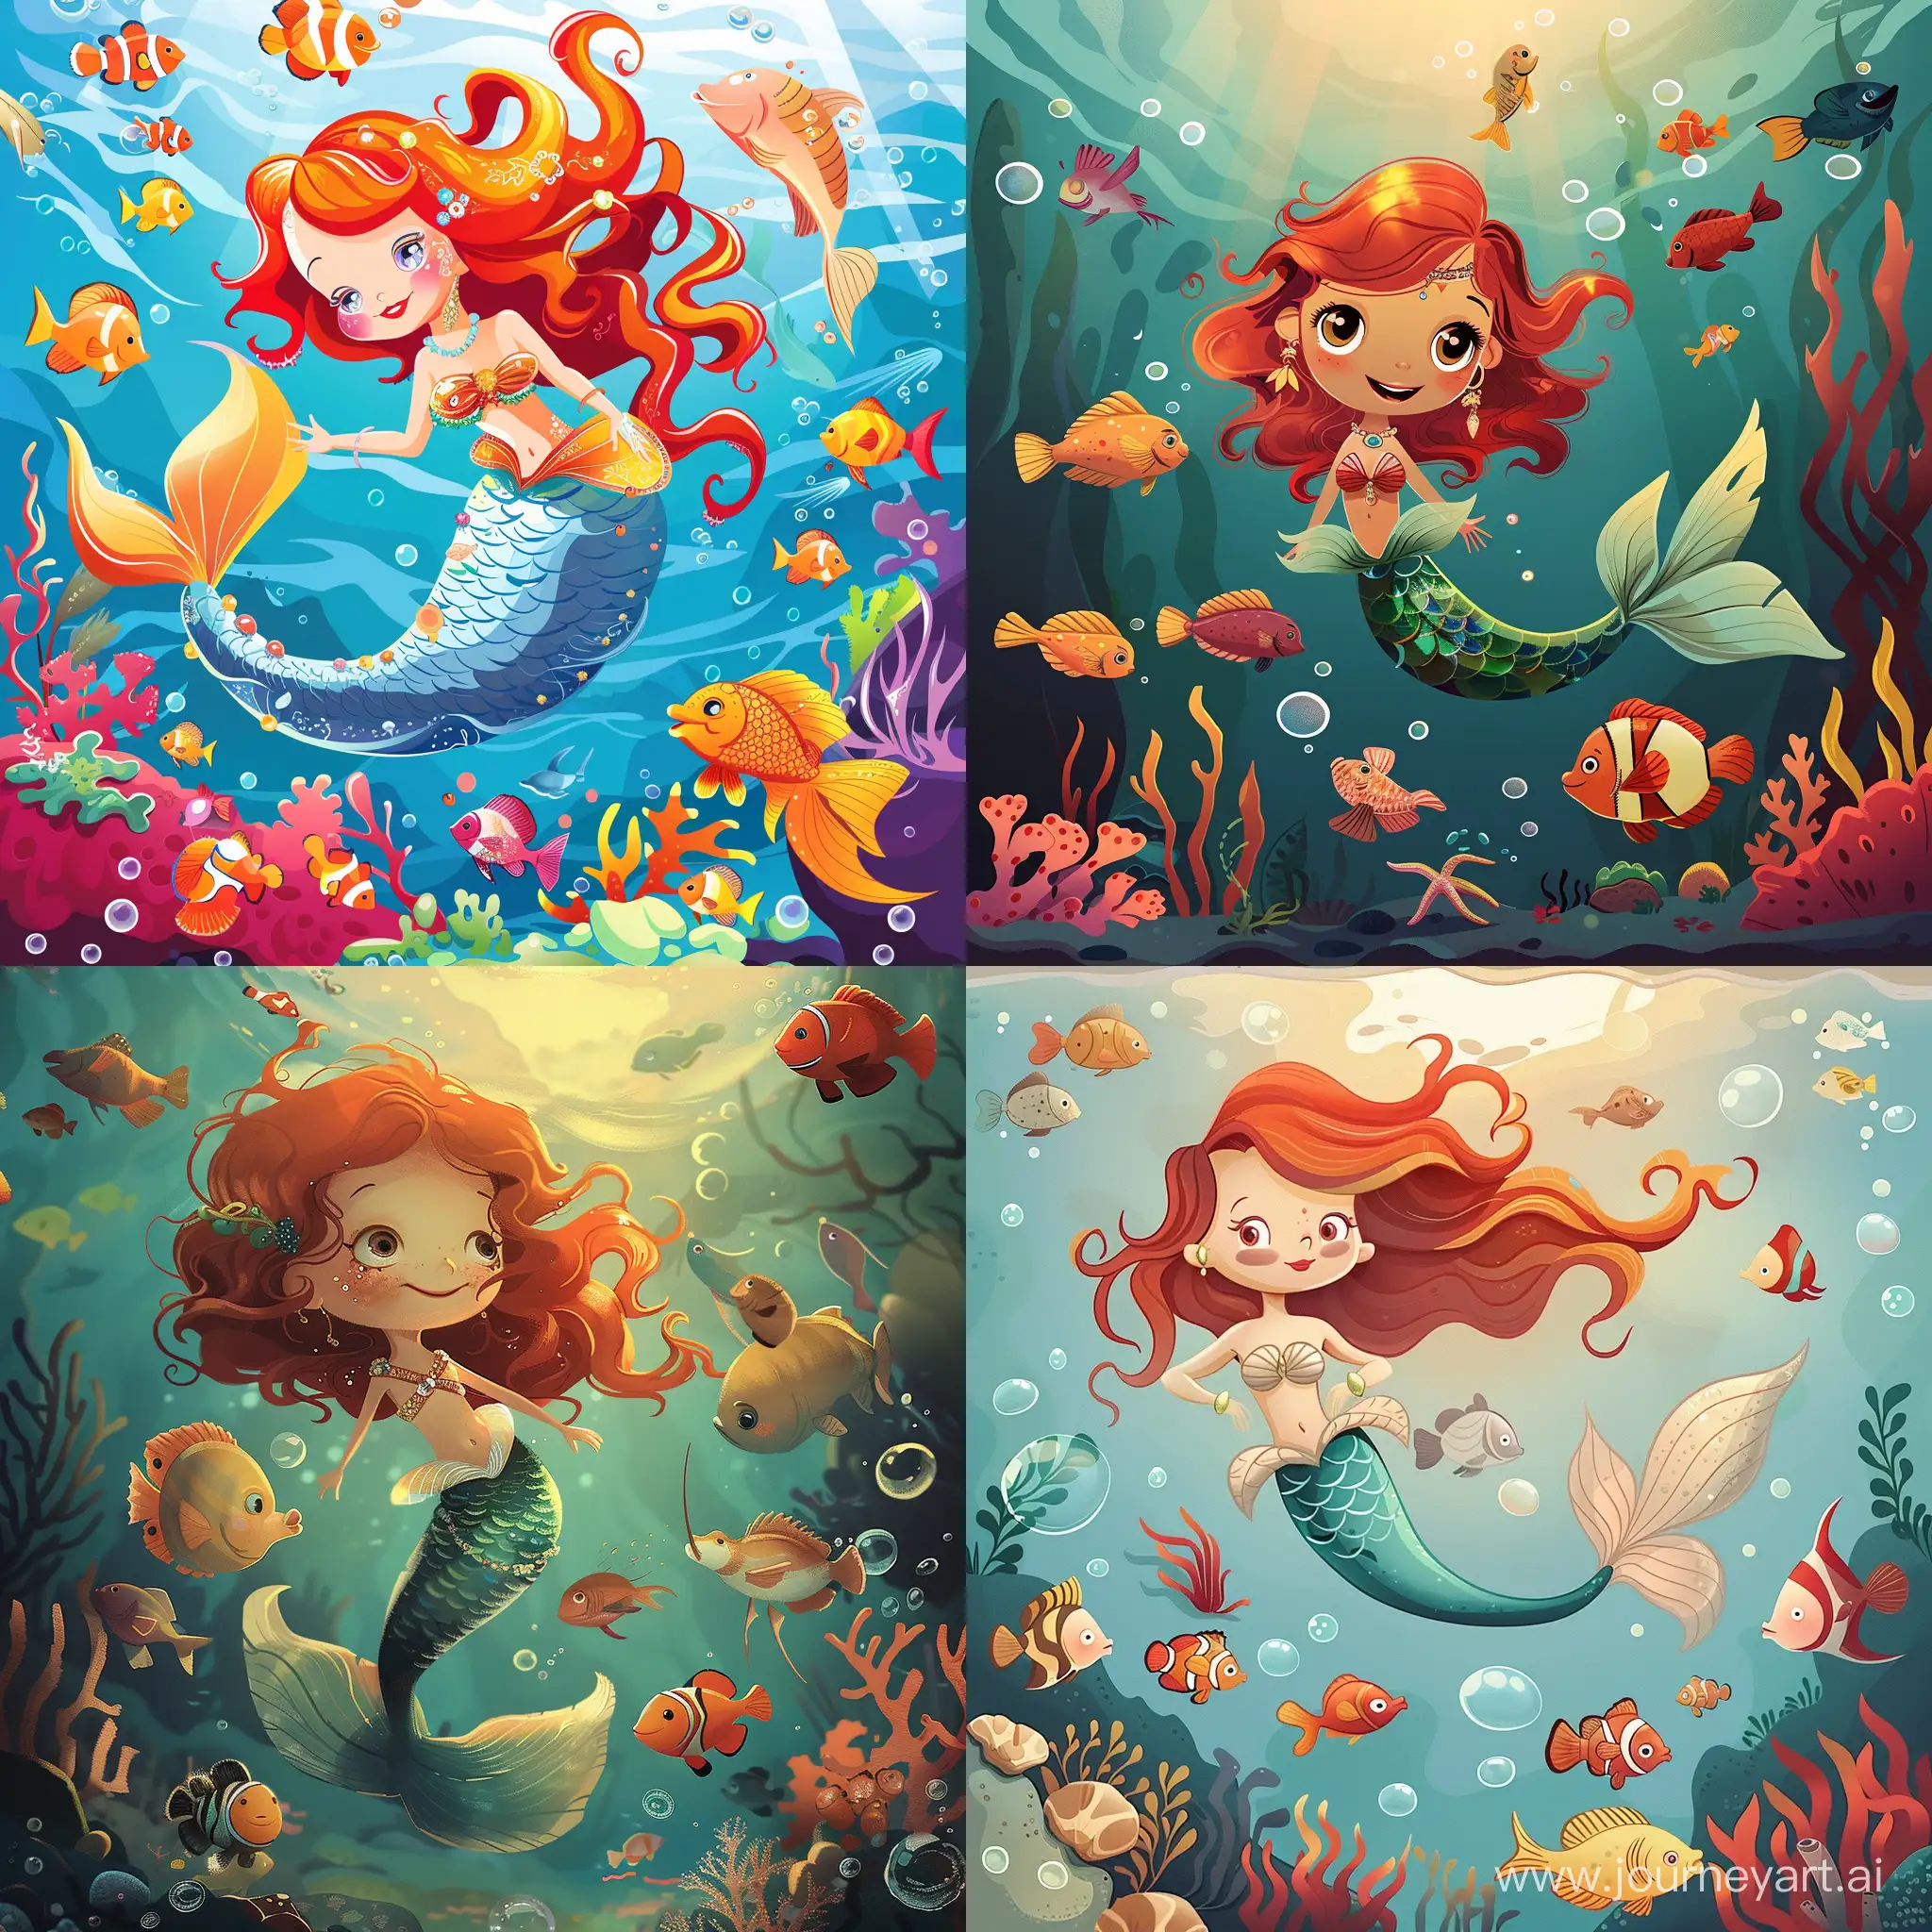 A mermaid is swimming along with other different fish in a sea. 16 years old girl • memaid Has a pretty face • She is wearing a mermaid dress • She has red wavy hair • She is also wearing jewelery on her beautiful tail Background is • Sea • Coral reefs • bubbles